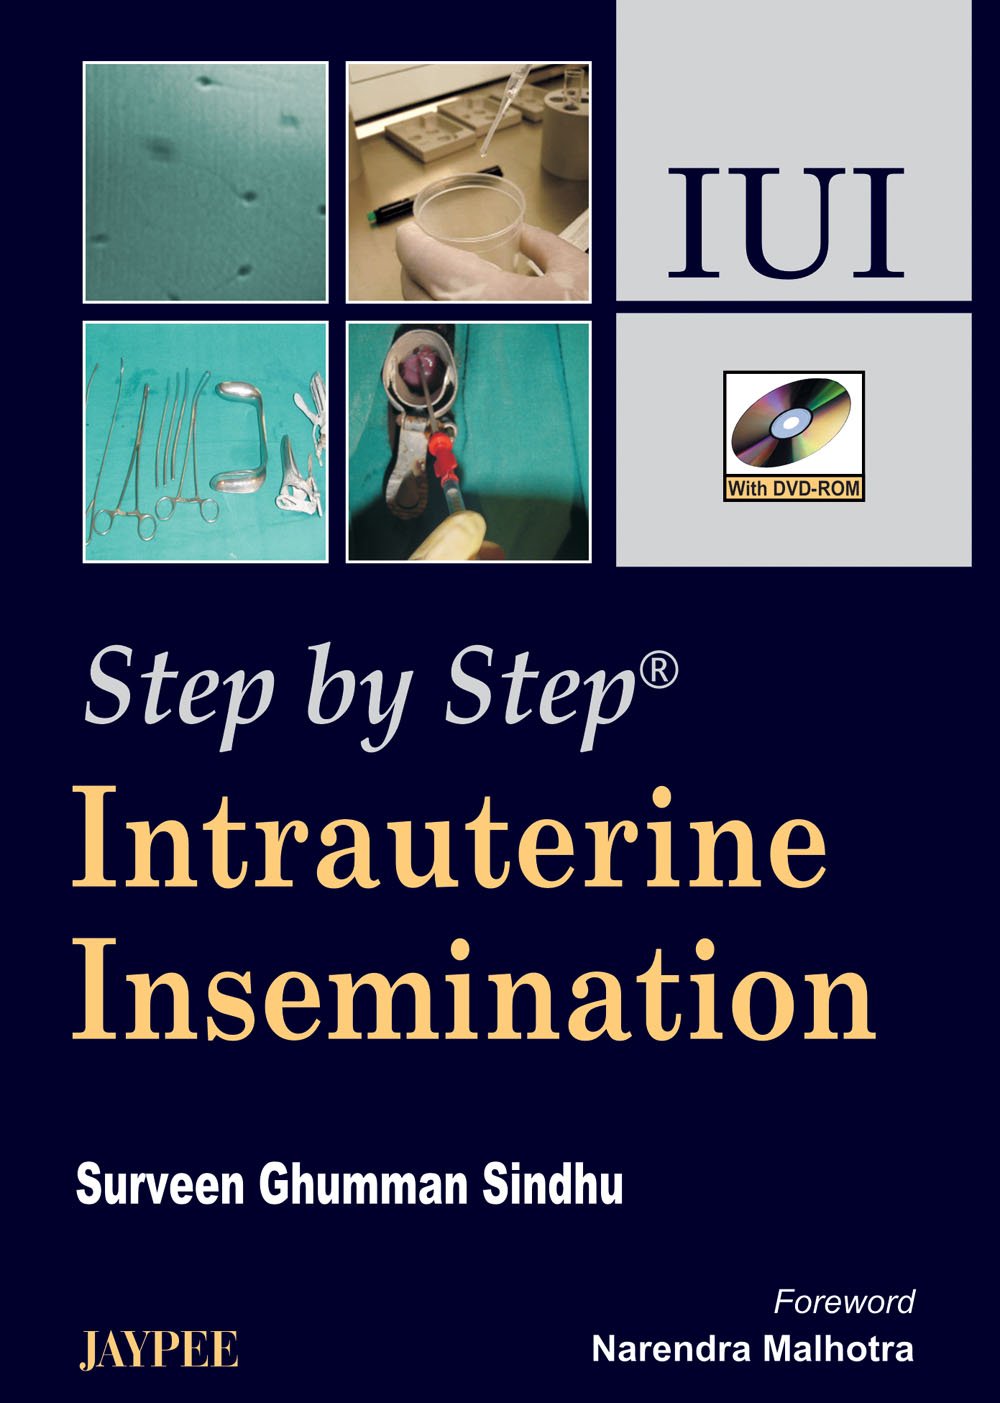 Step By Step Intrauterine Insemination Iui With Dvd-Rom